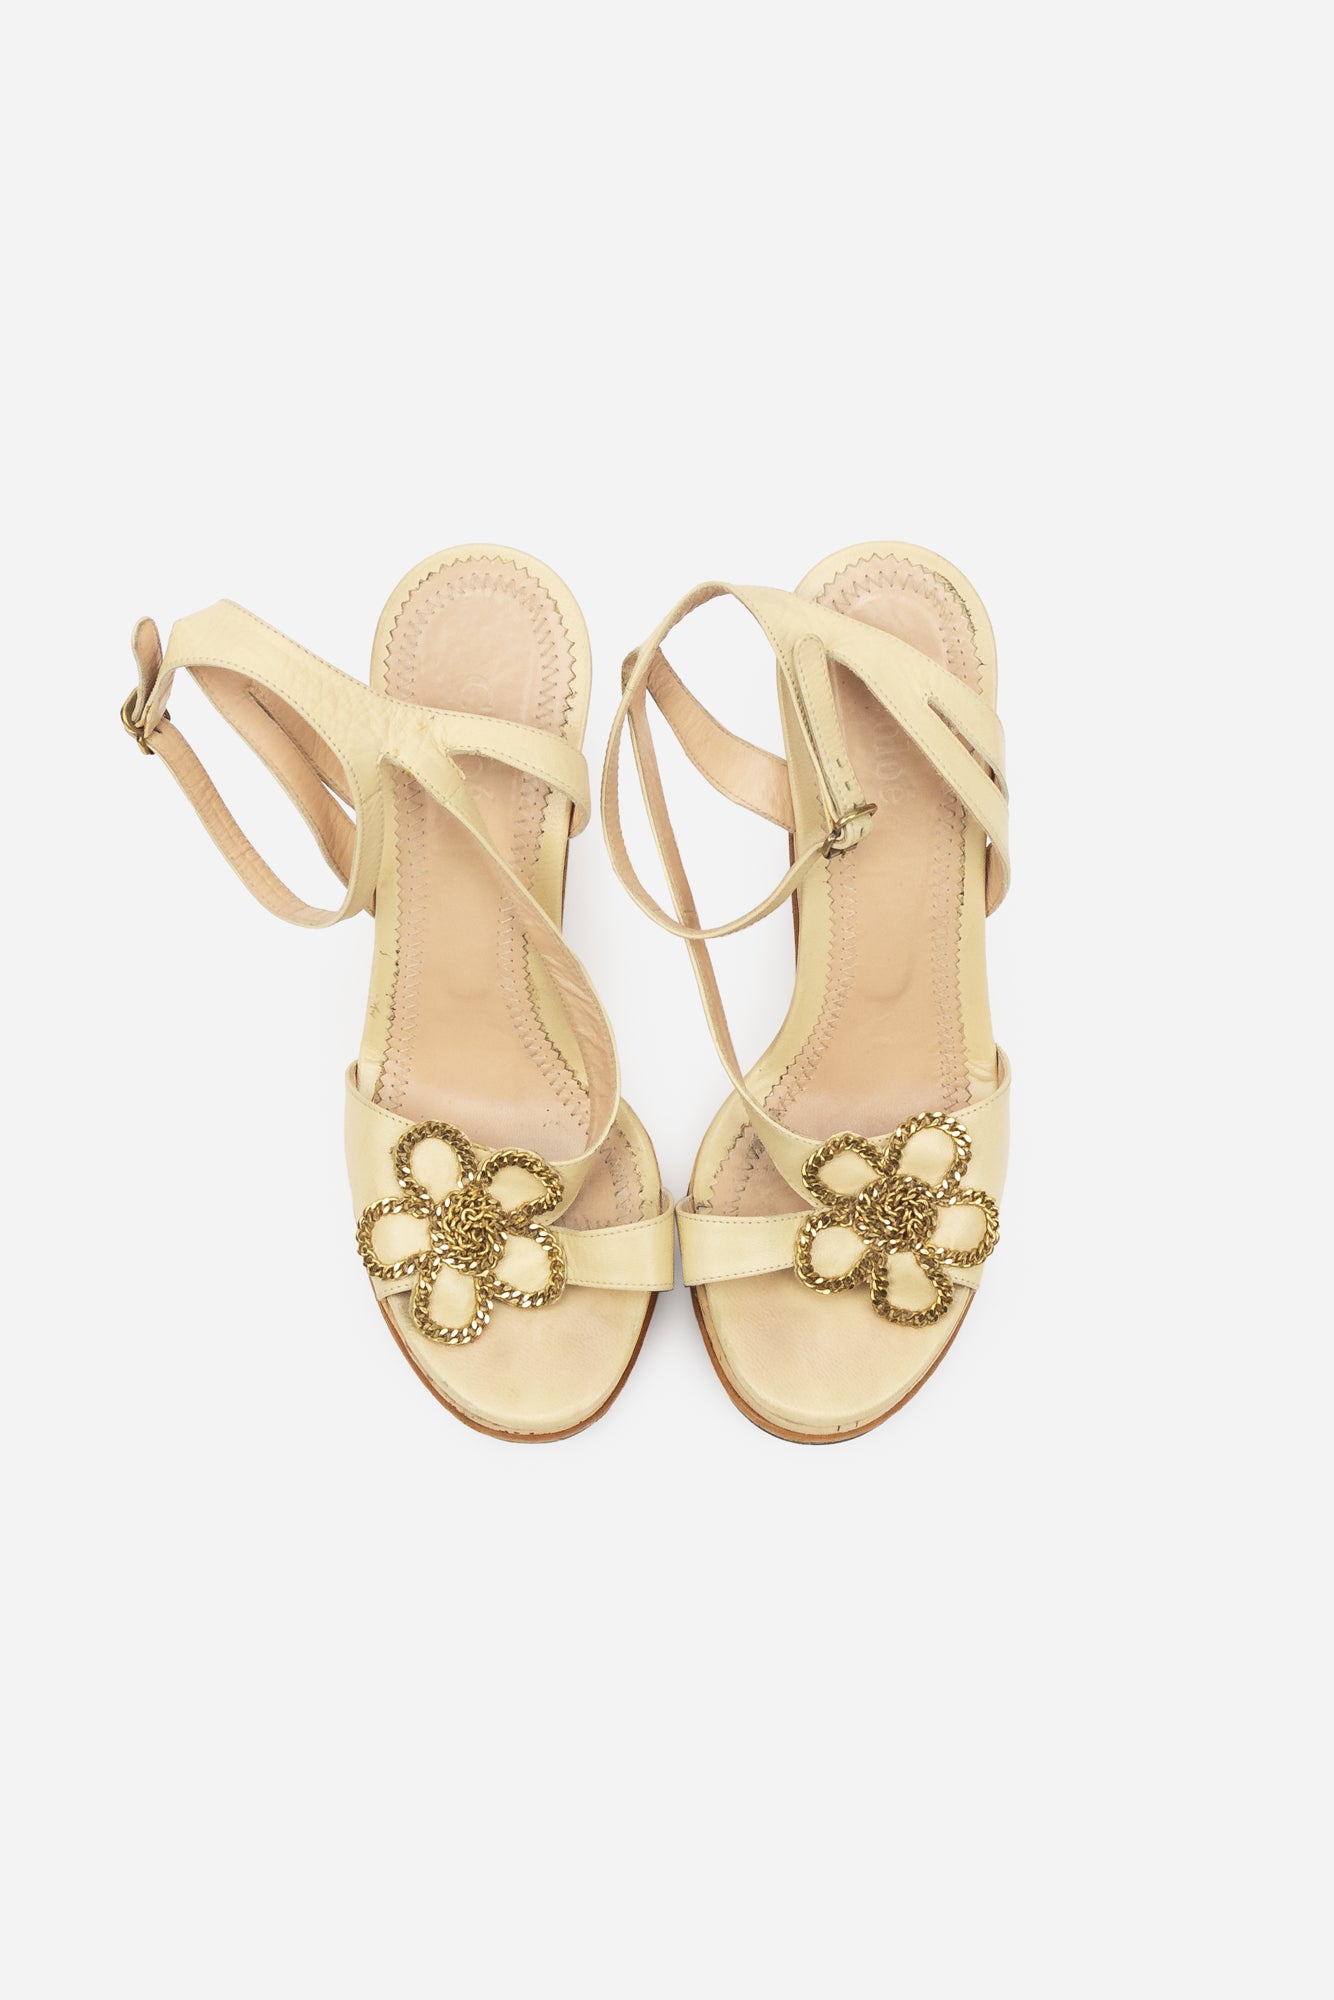 Nude Leather Cork Wedge Sandals with Chain Embellished Floral Detail